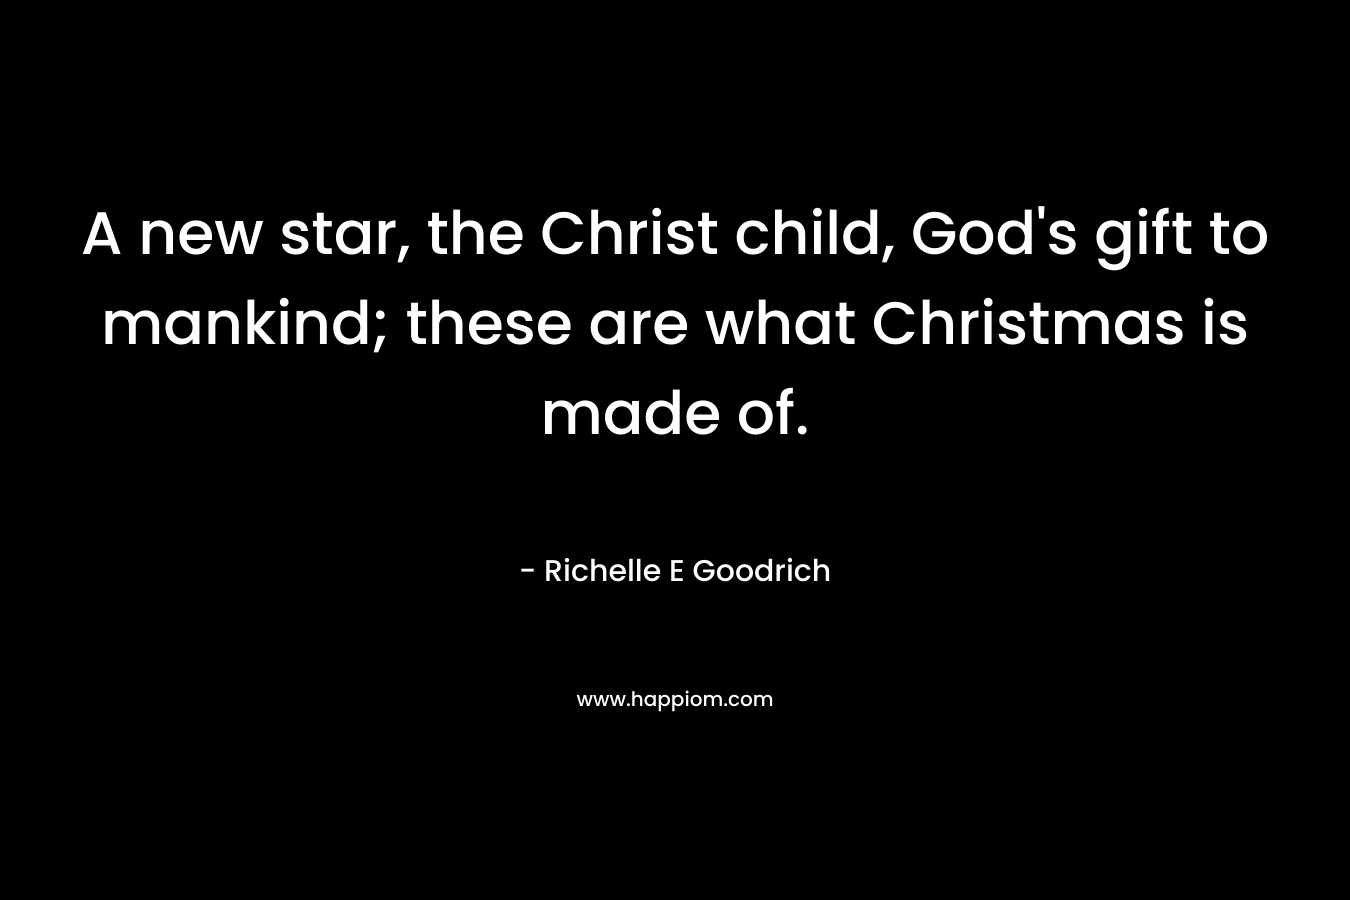 A new star, the Christ child, God's gift to mankind; these are what Christmas is made of.